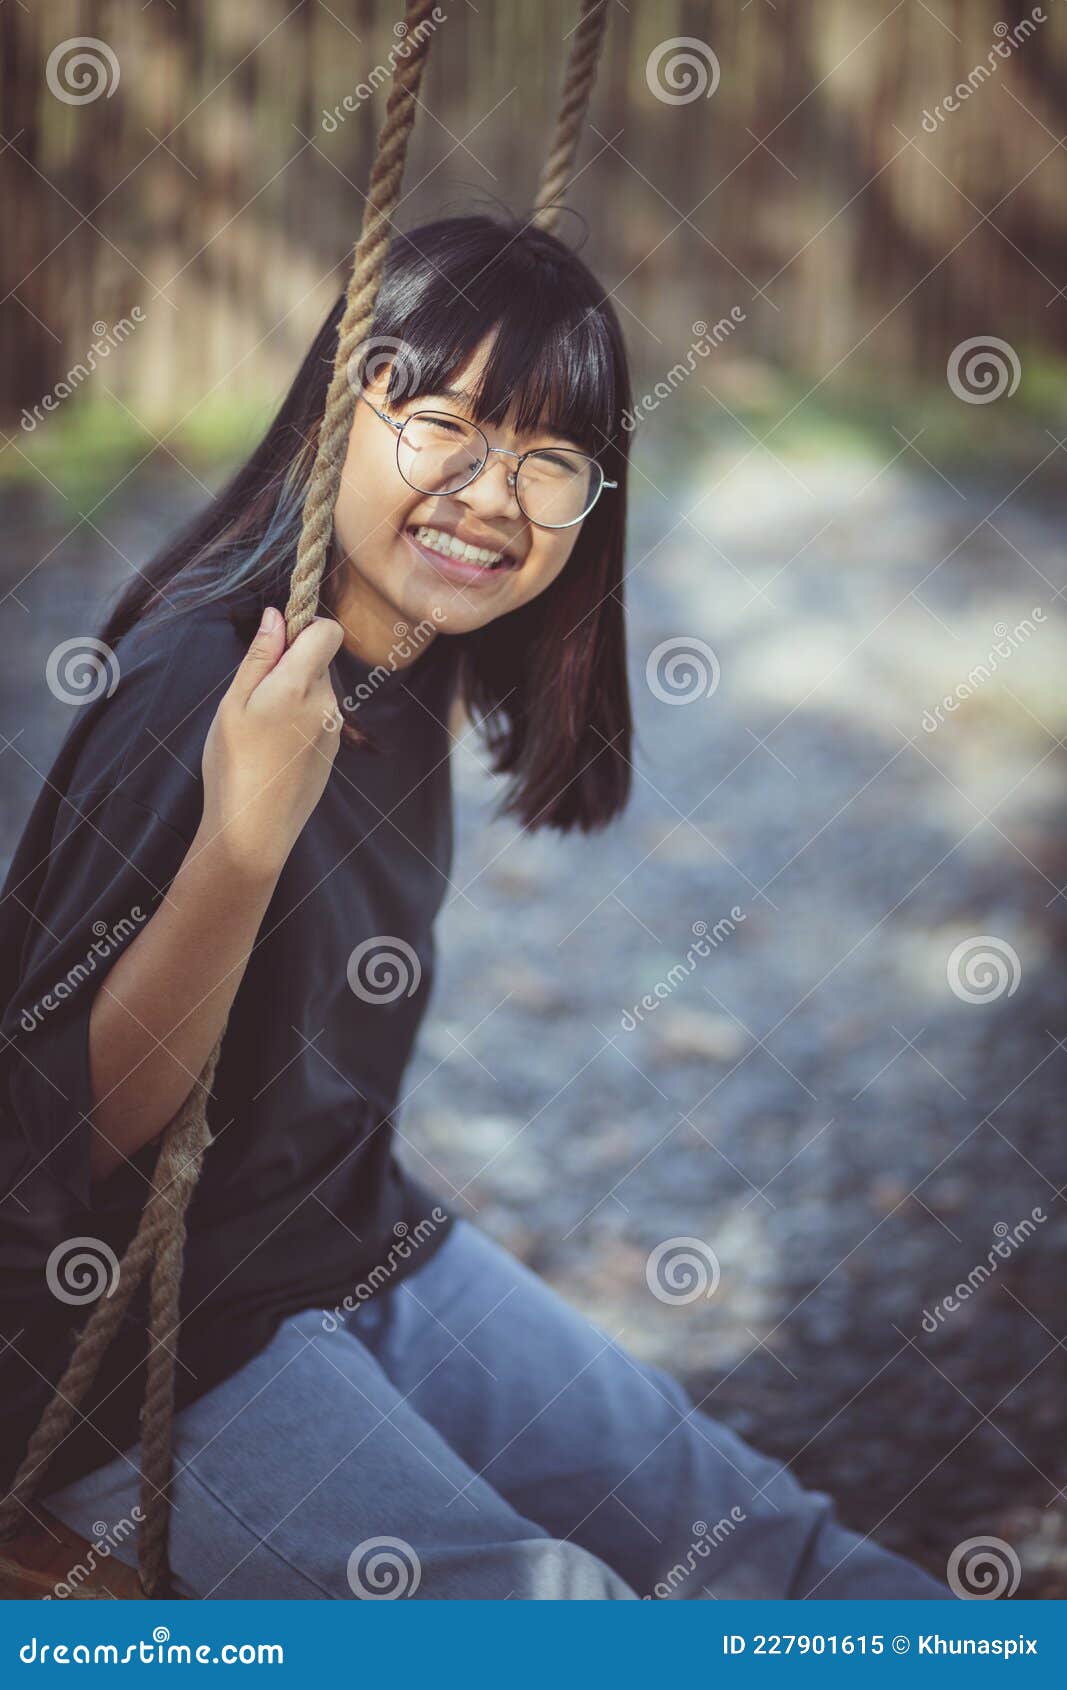 Toothy Smiling Face Of Asian Teenager Relaxing In Public Park Stock Image Image Of Cheerful